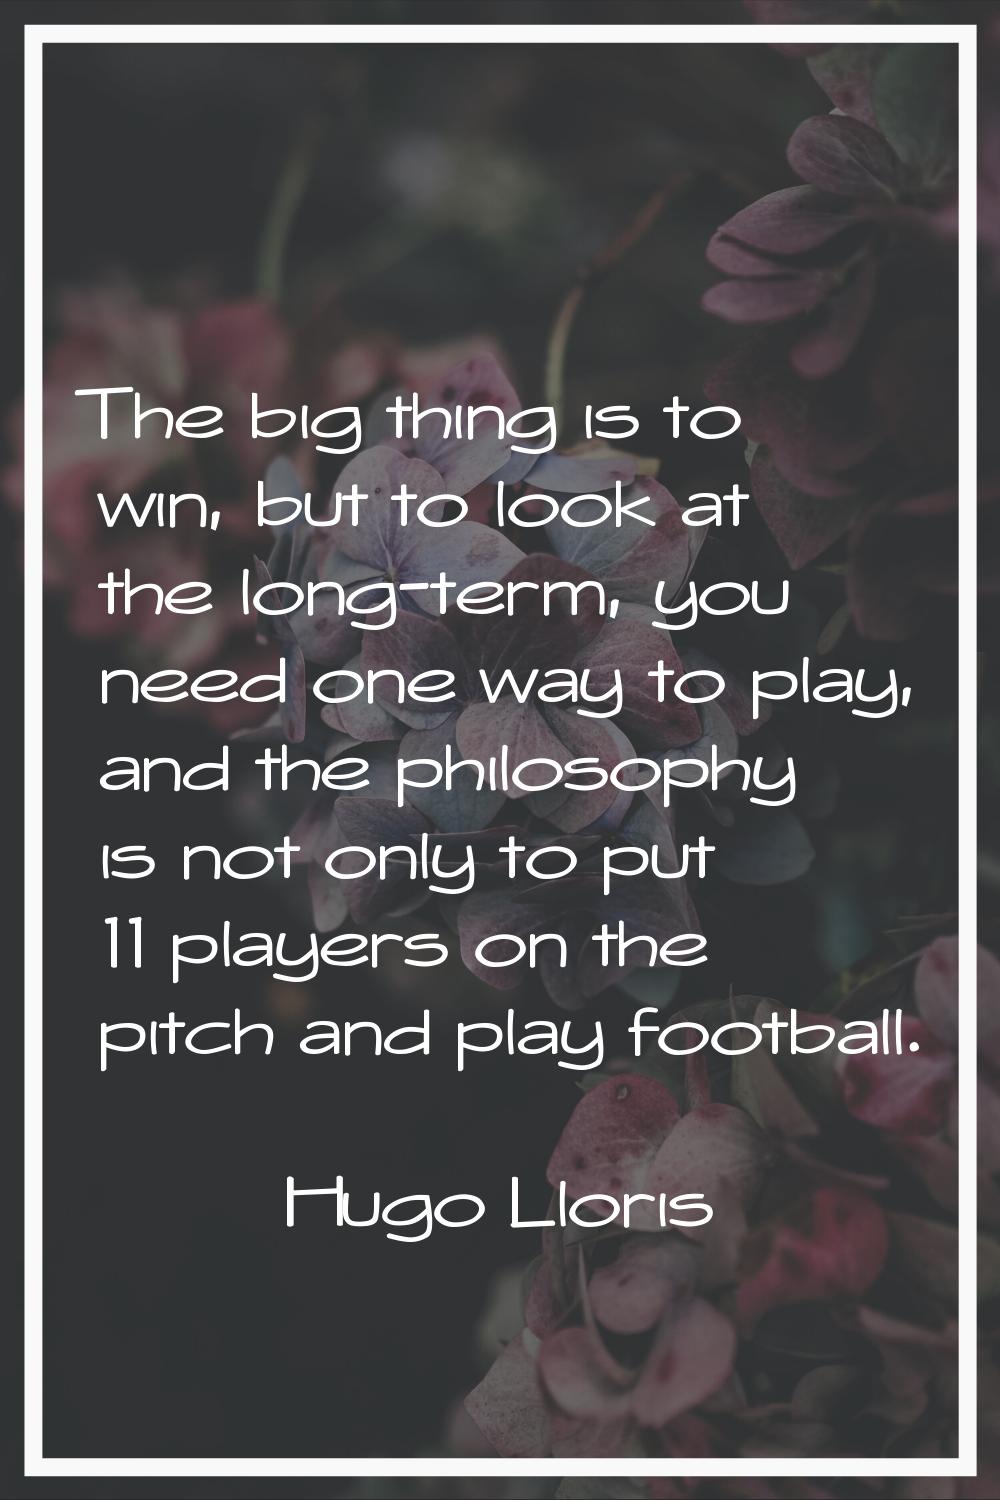 The big thing is to win, but to look at the long-term, you need one way to play, and the philosophy